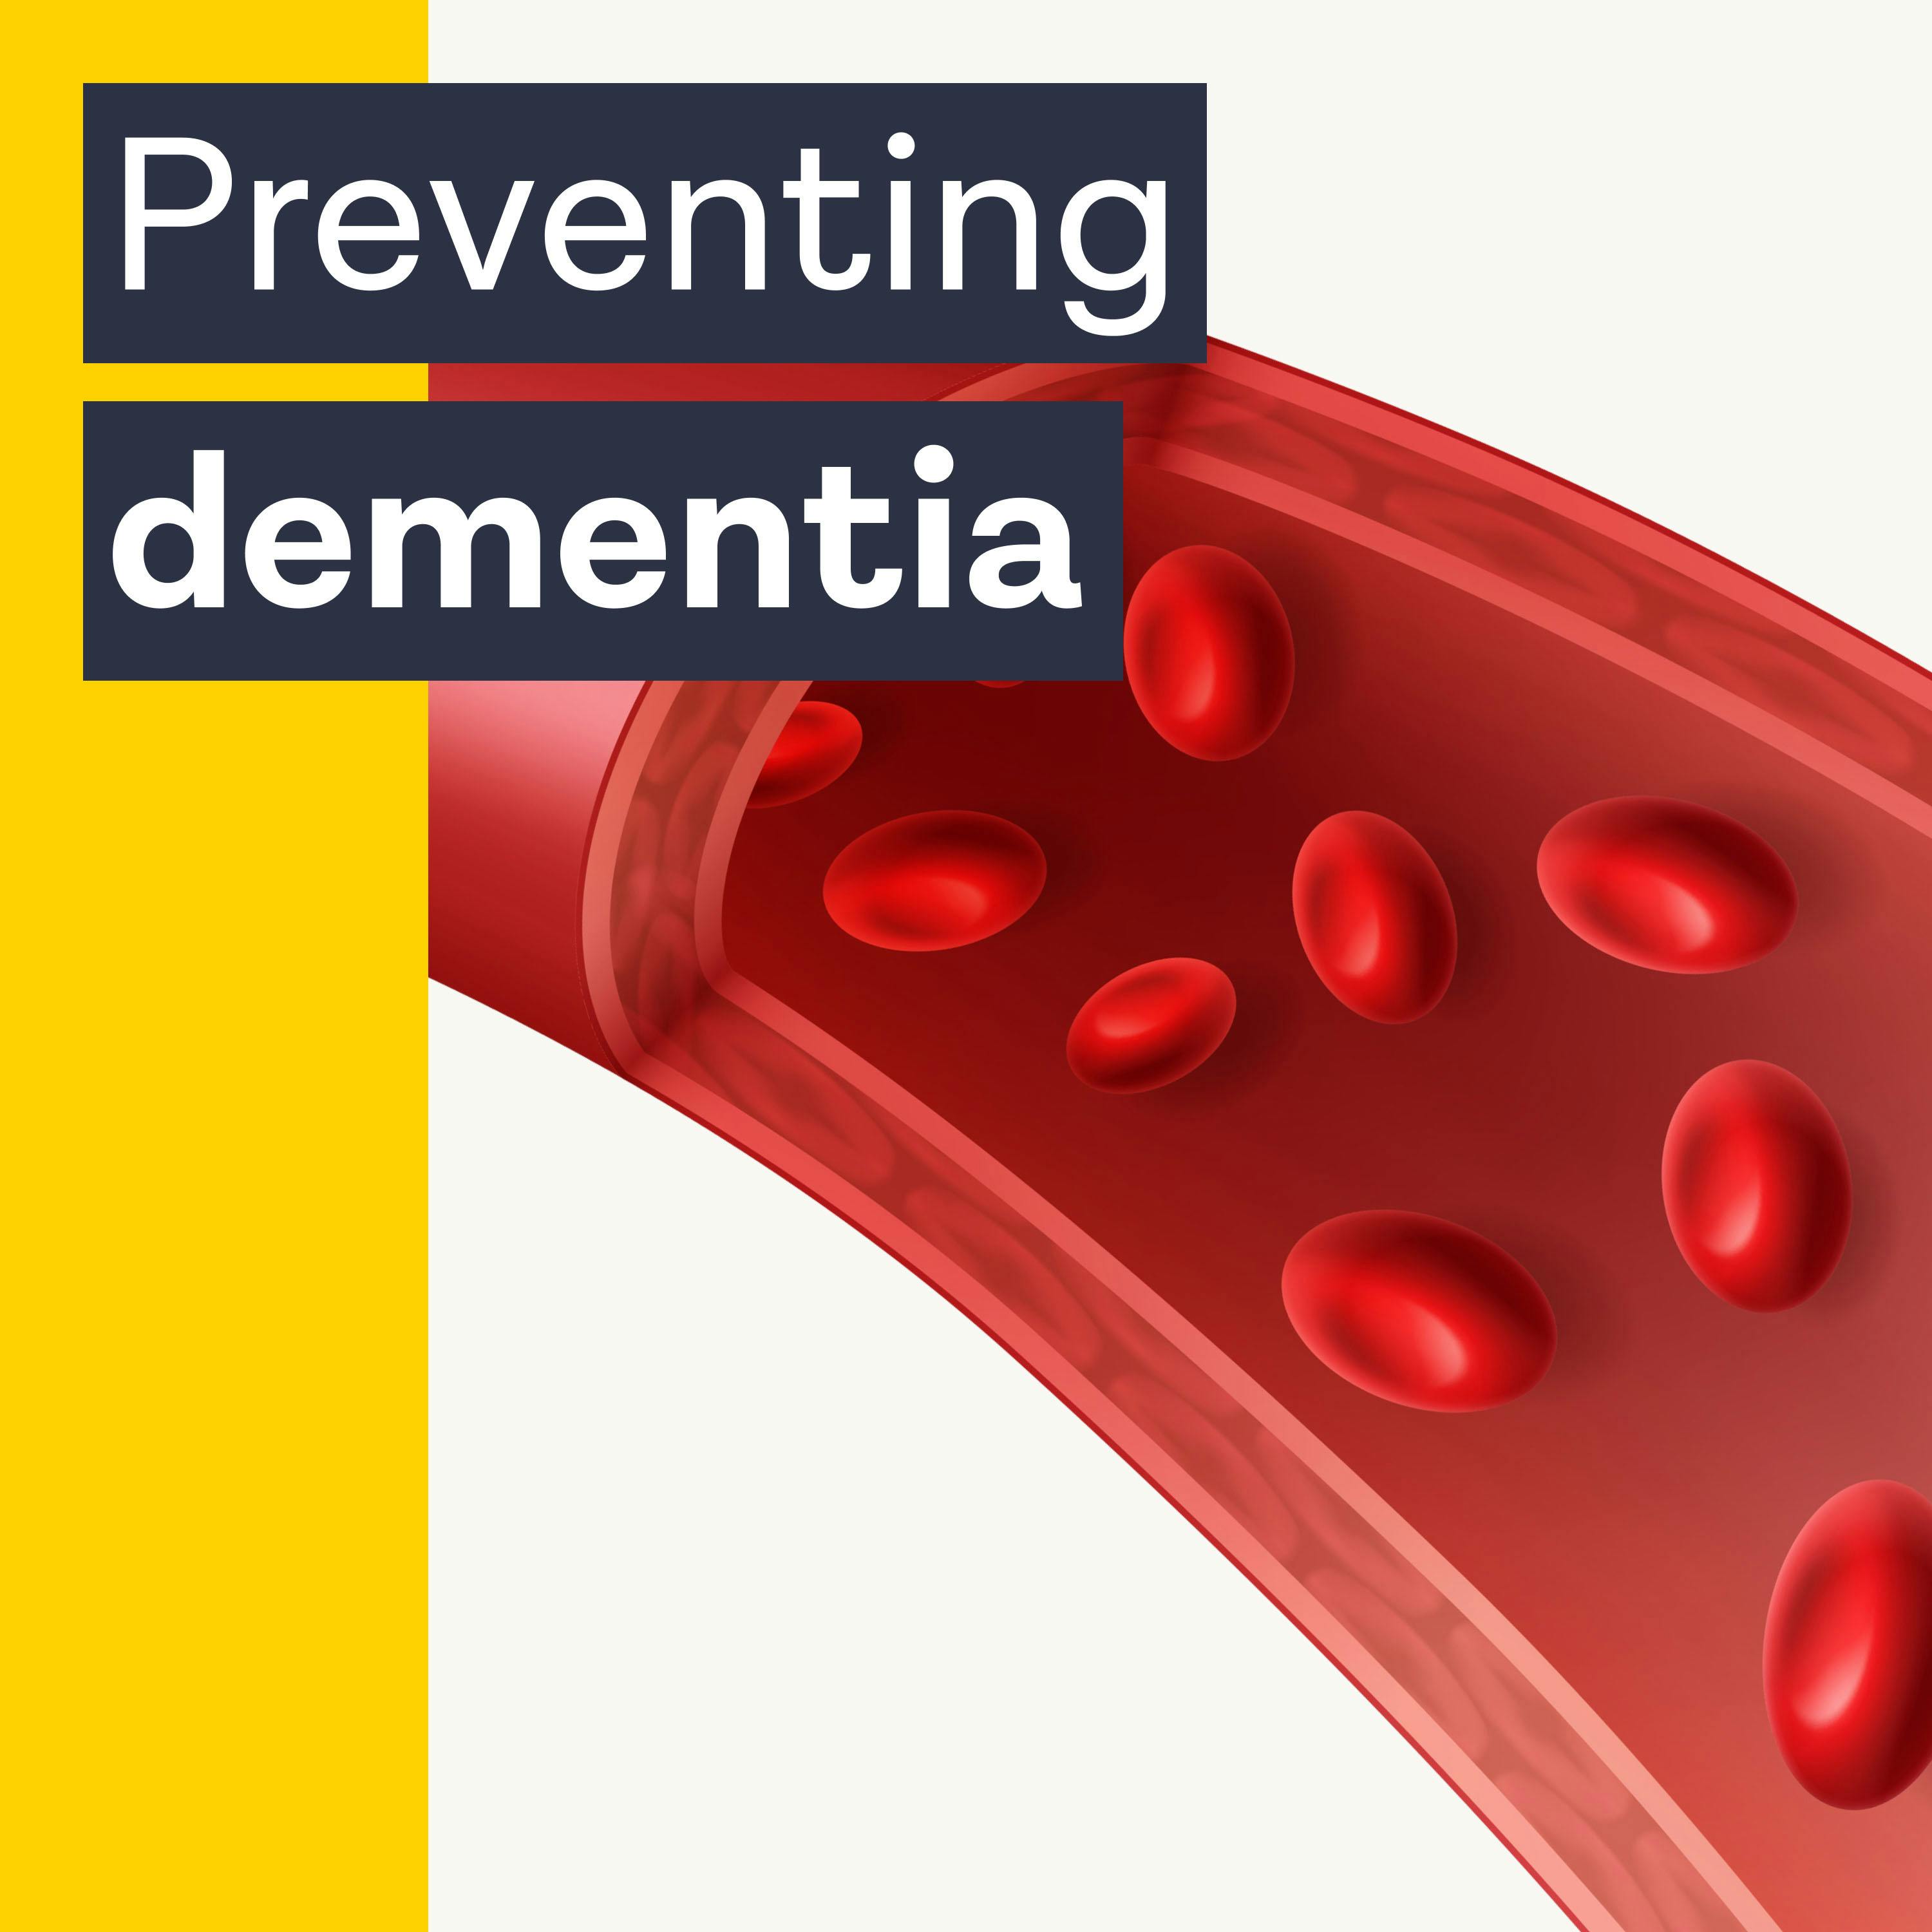 Why dementia could start in your blood vessels with Dr. William Li